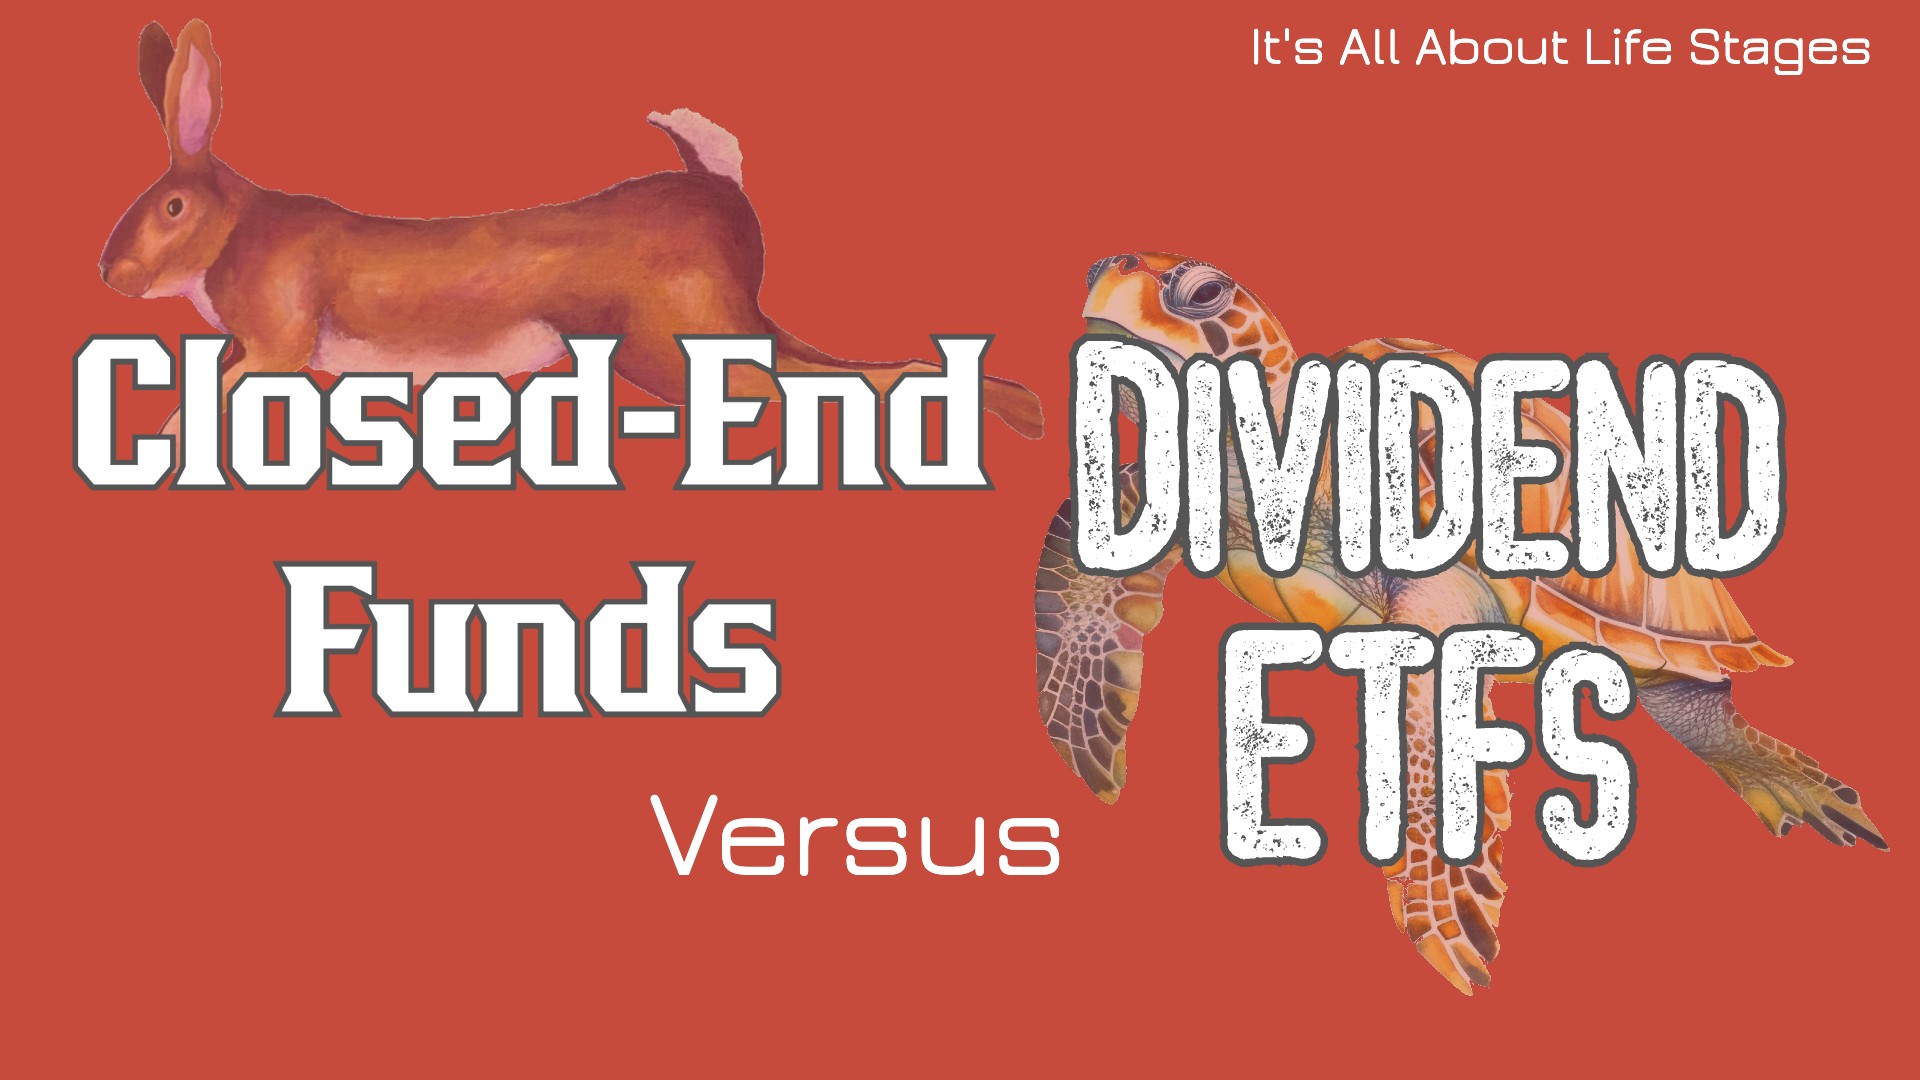 Closed-End Funds vs. Dividend ETFs: It’s All About Life Stages